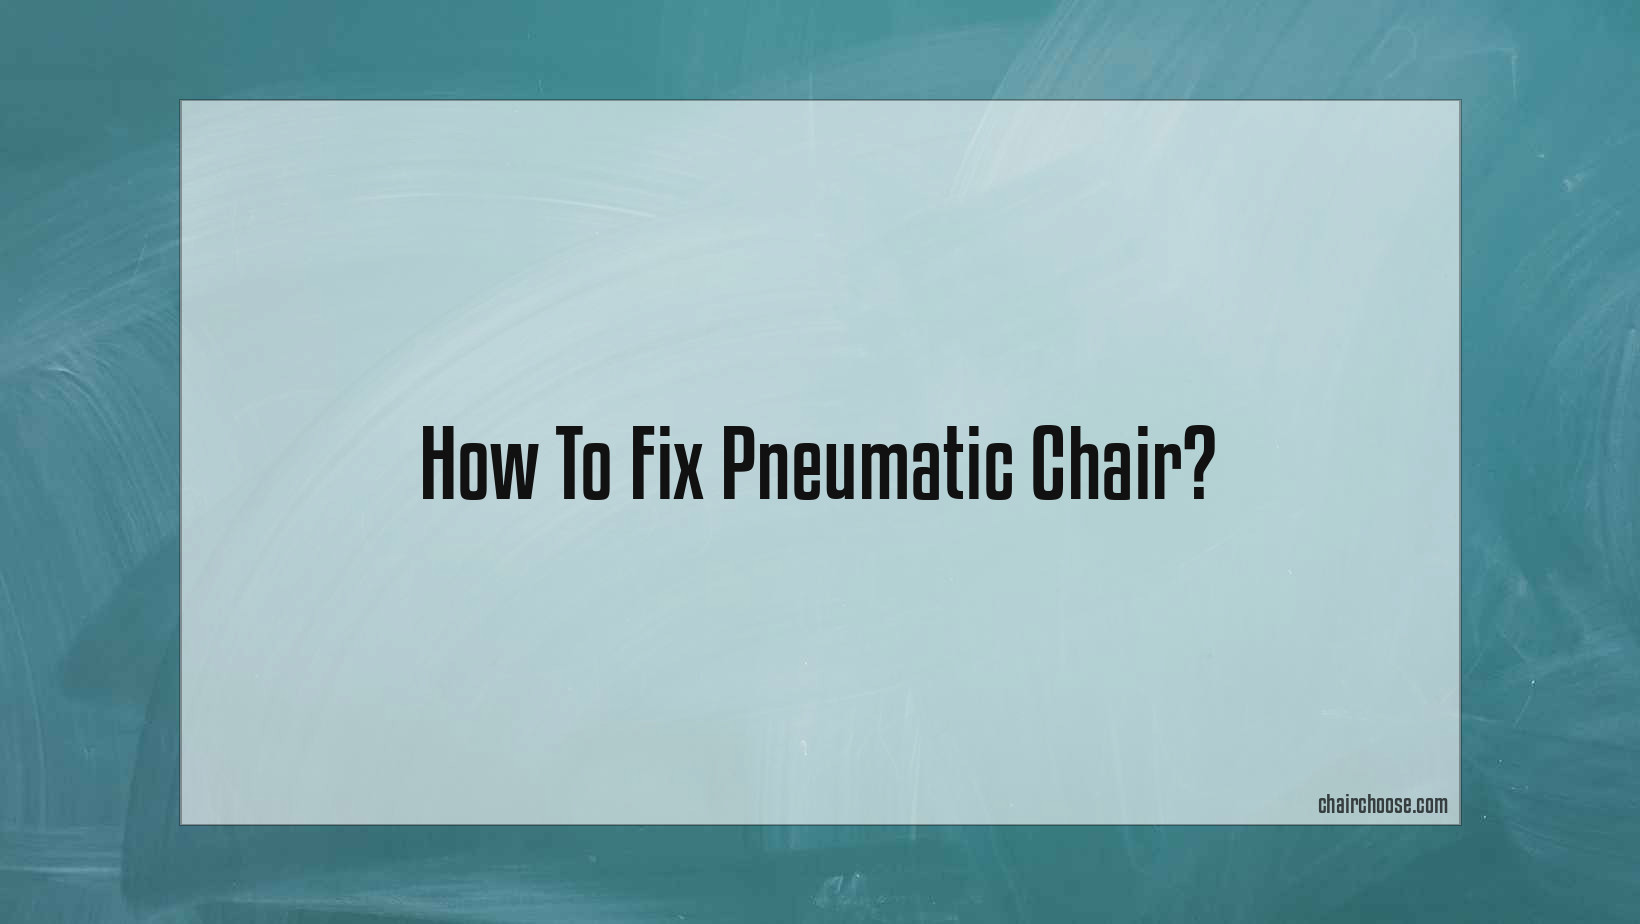 How To Fix Pneumatic Chair?